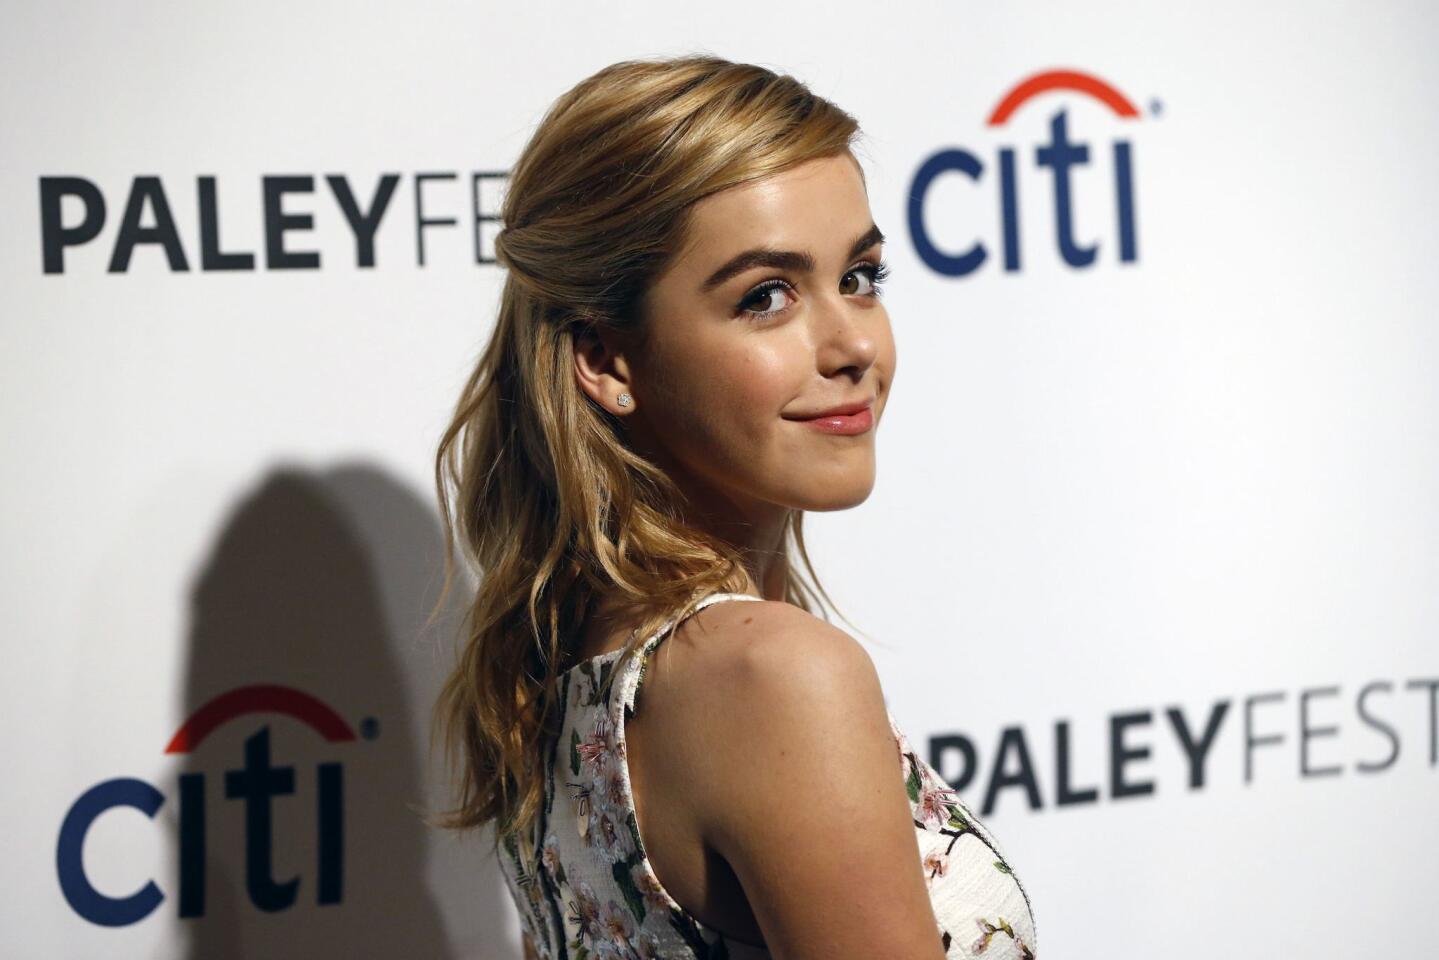 Cast member Shipka poses as she arrives for a panel discussion for the television series "Mad Men" during the William S. Paley Television Festival (PaleyFest) at the Dolby theatre in Hollywood